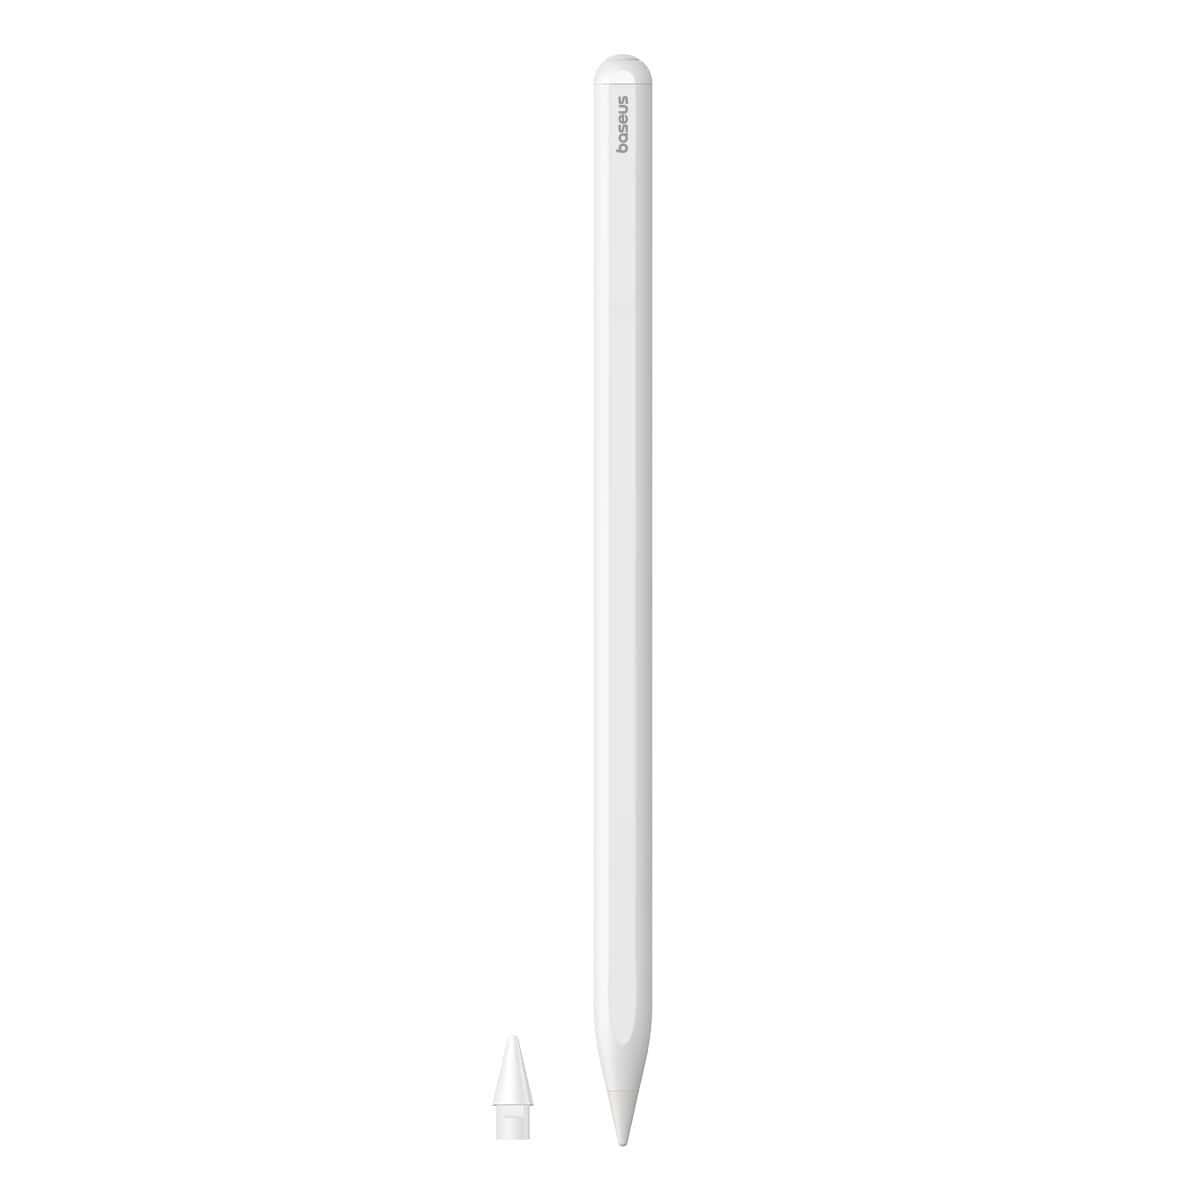 Baseus Smooth Writing 2 Series Wireless Charging Stylus, Moon White(Active version with active pen tip)